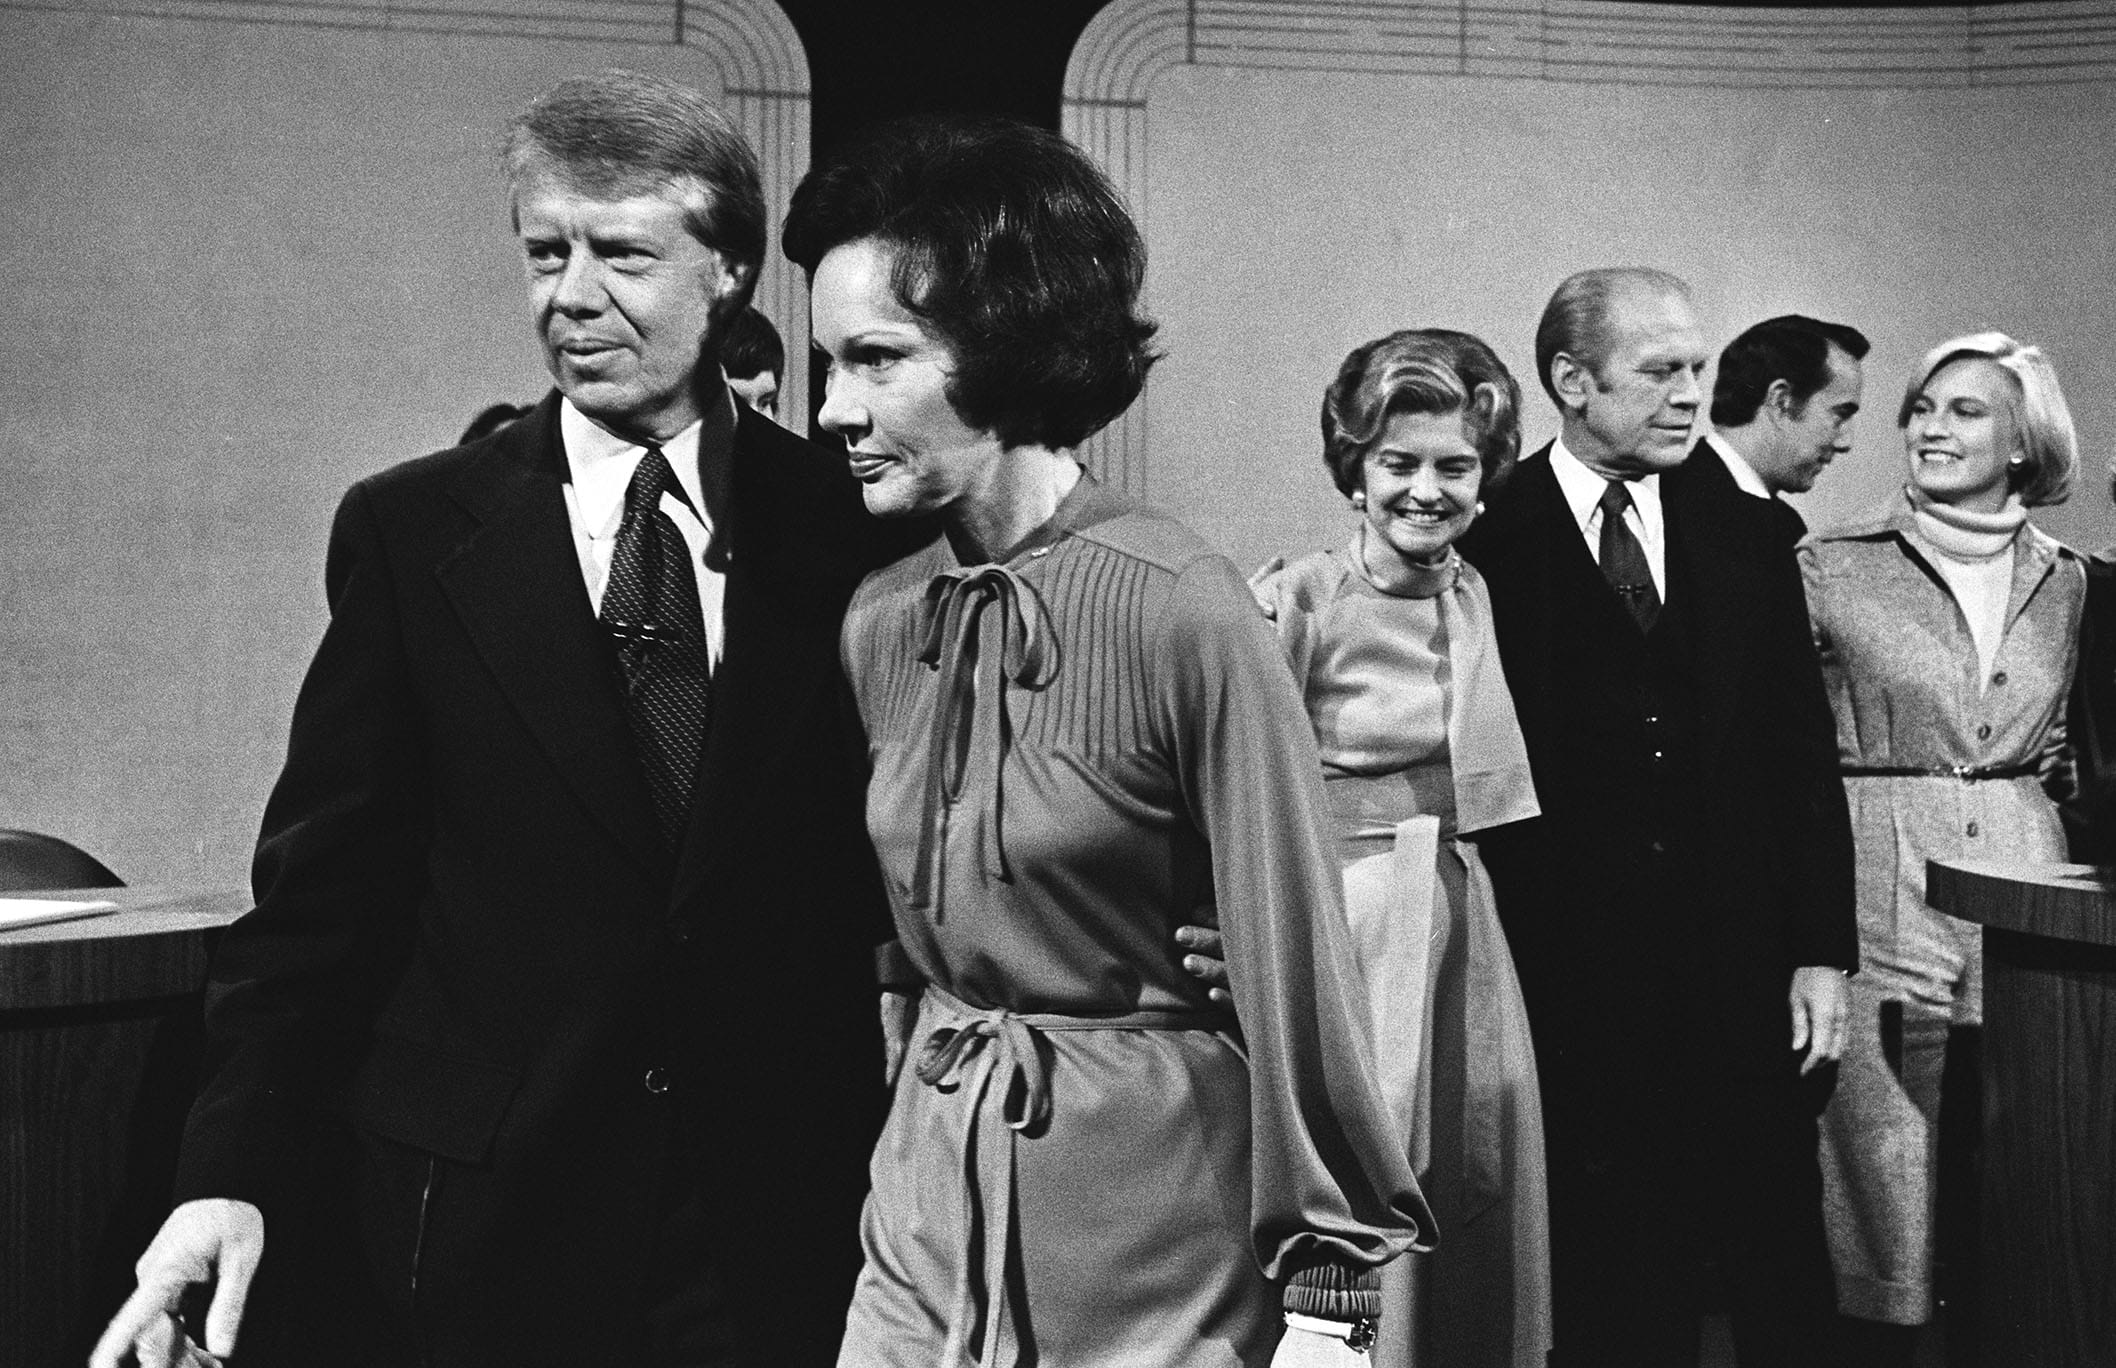 Democratic presidential nominee Jimmy Carter and wife Rosalynn walk away from the President and Mrs. Ford after their third and final debate at William &amp; Mary College, Williamsburg, Virginia, Oct. 22, 1976. FordÕs running mate Sen. Bob Dole talks to Susan Ford behind them. Carter won the election eleven days later.